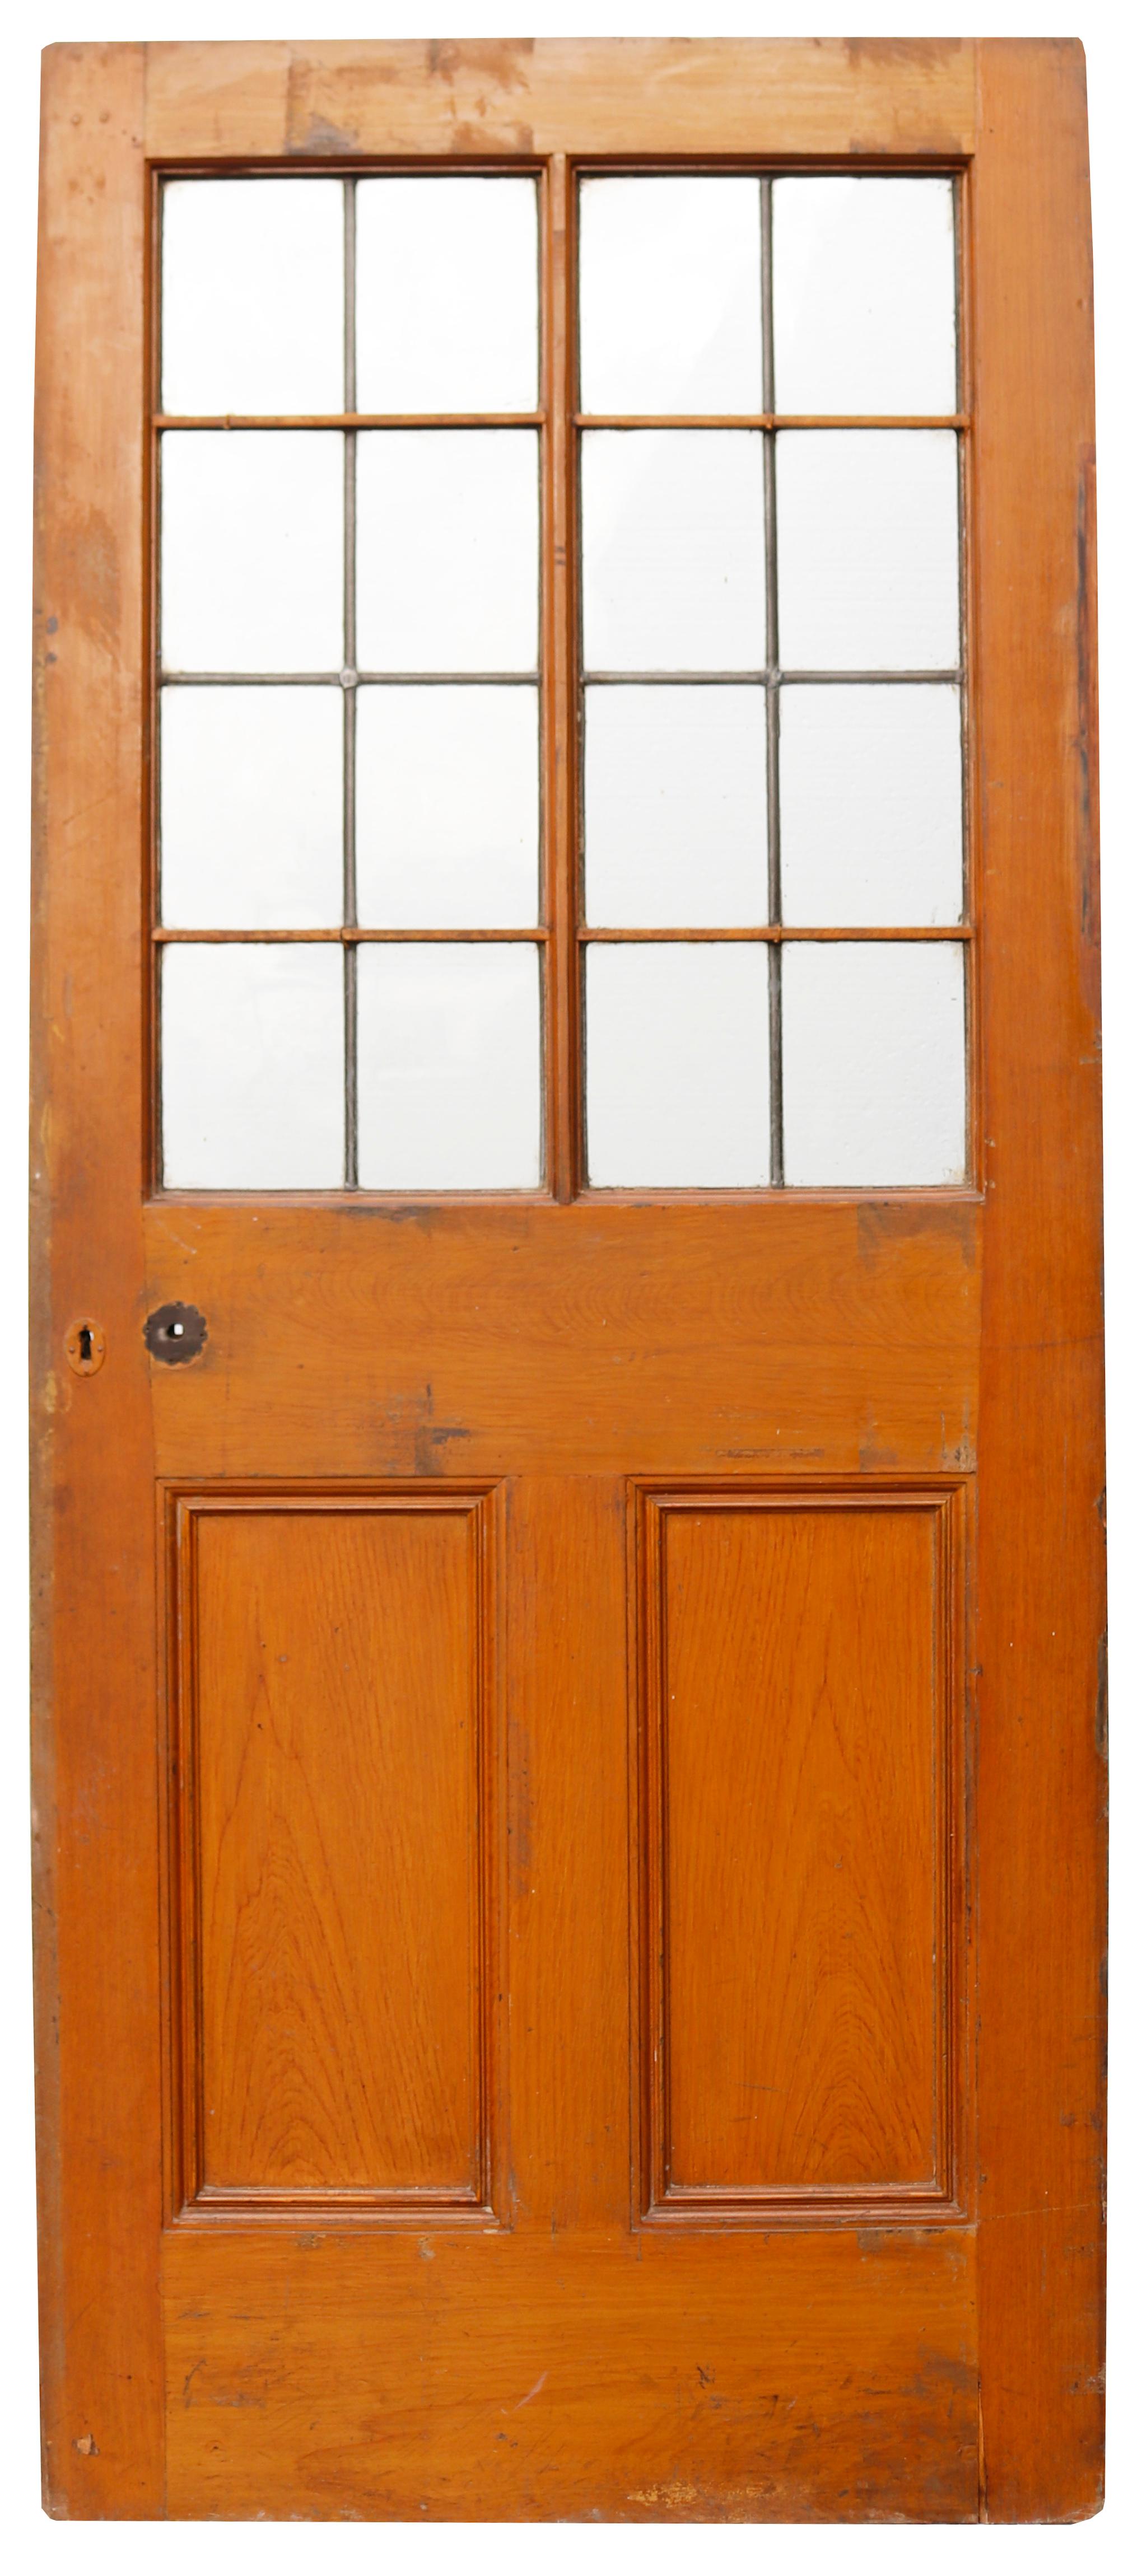 An antique glazed and leaded pine door. This door is suitable for use as a front door.

Glass is in excellent condition with no breaks.